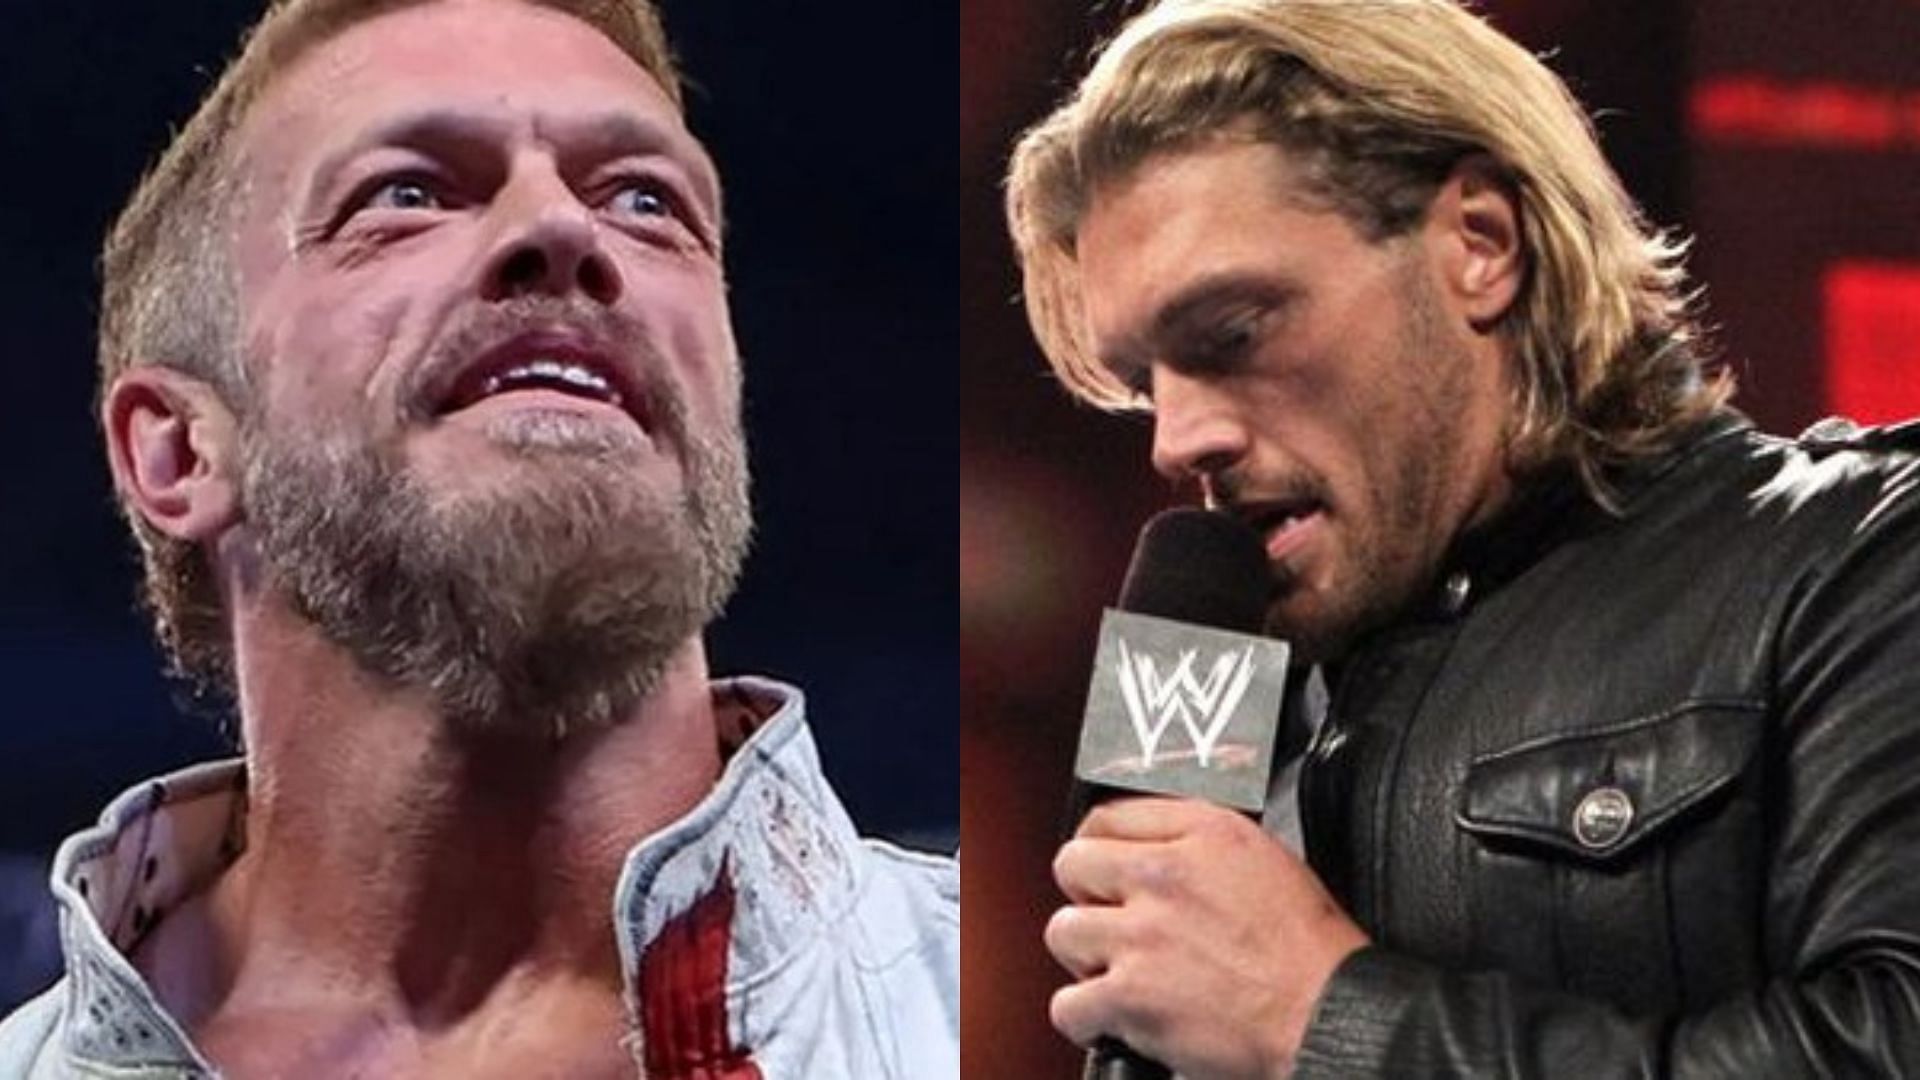 Edge will be in action this week on SmackDown